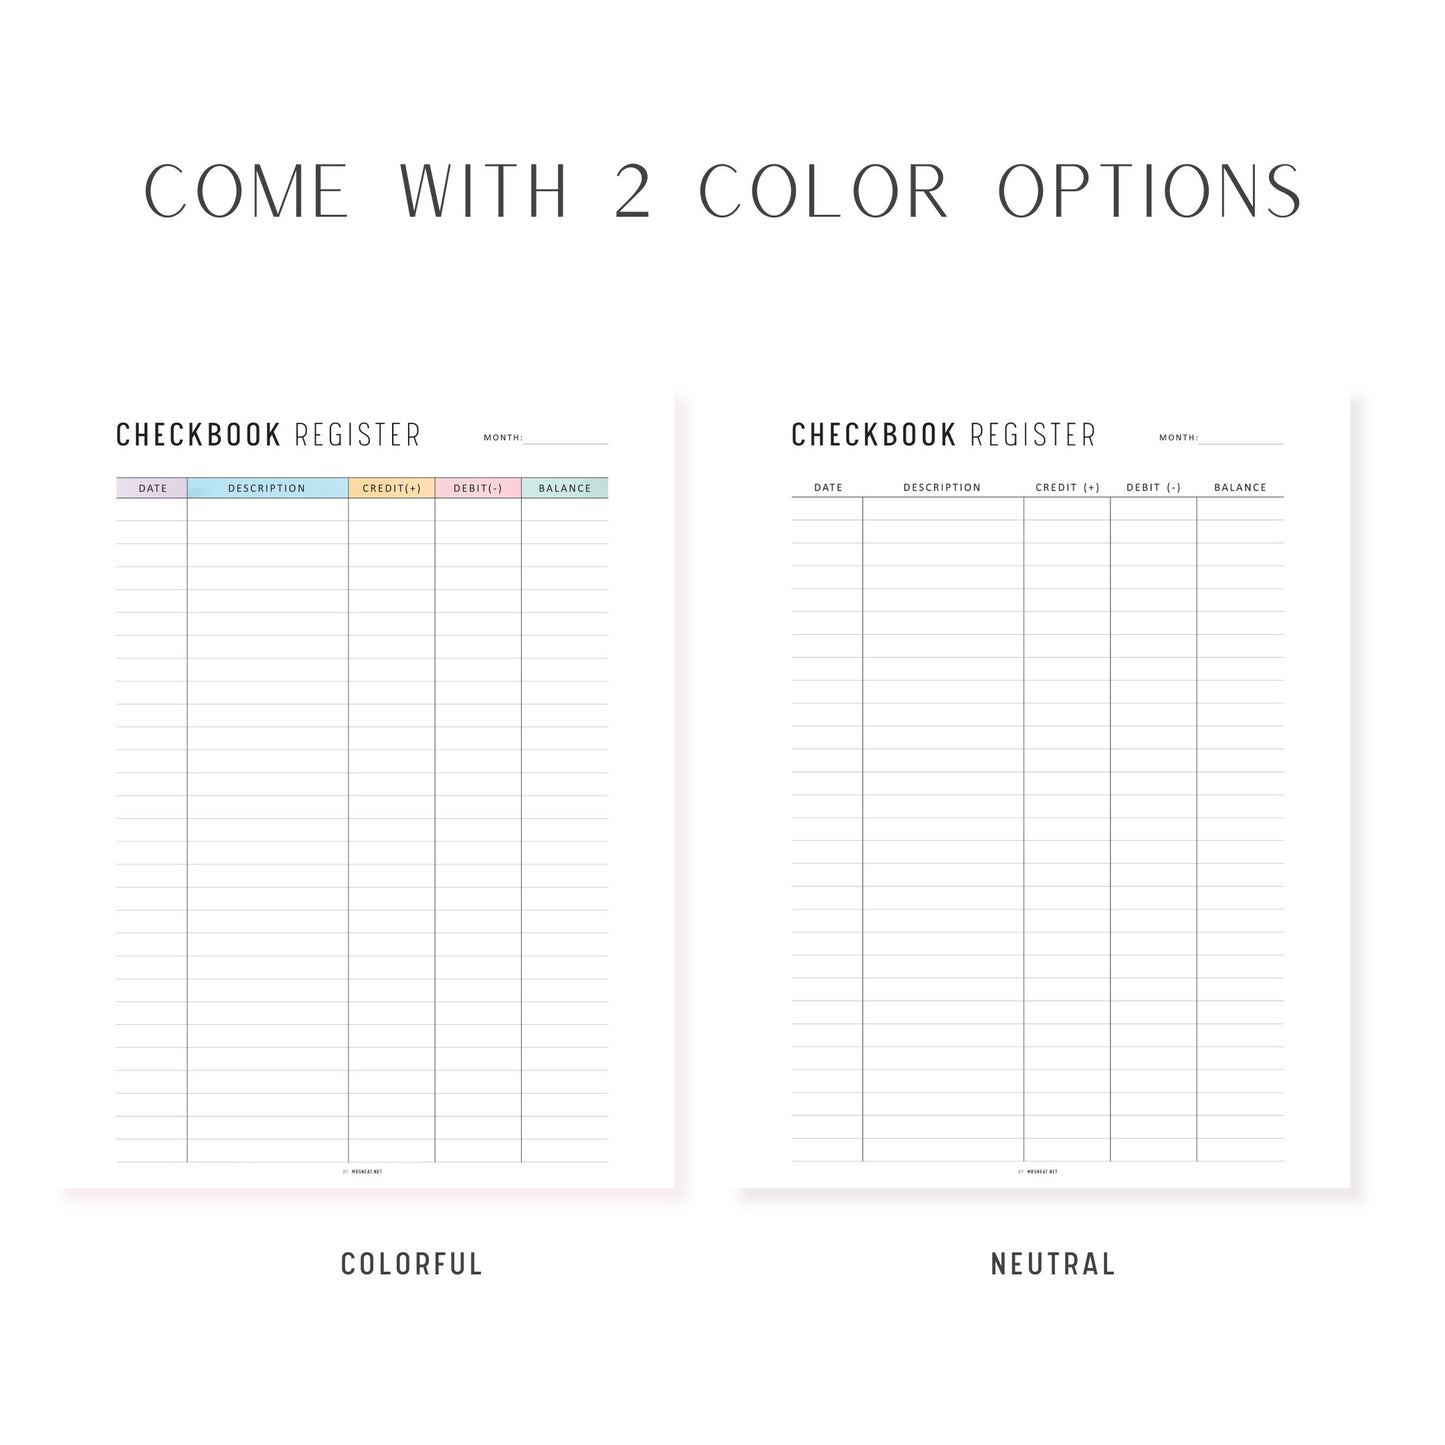 Checkbook Register Printable, Minimalist and Colorful Page, A4, A5, Letter, Half Letter